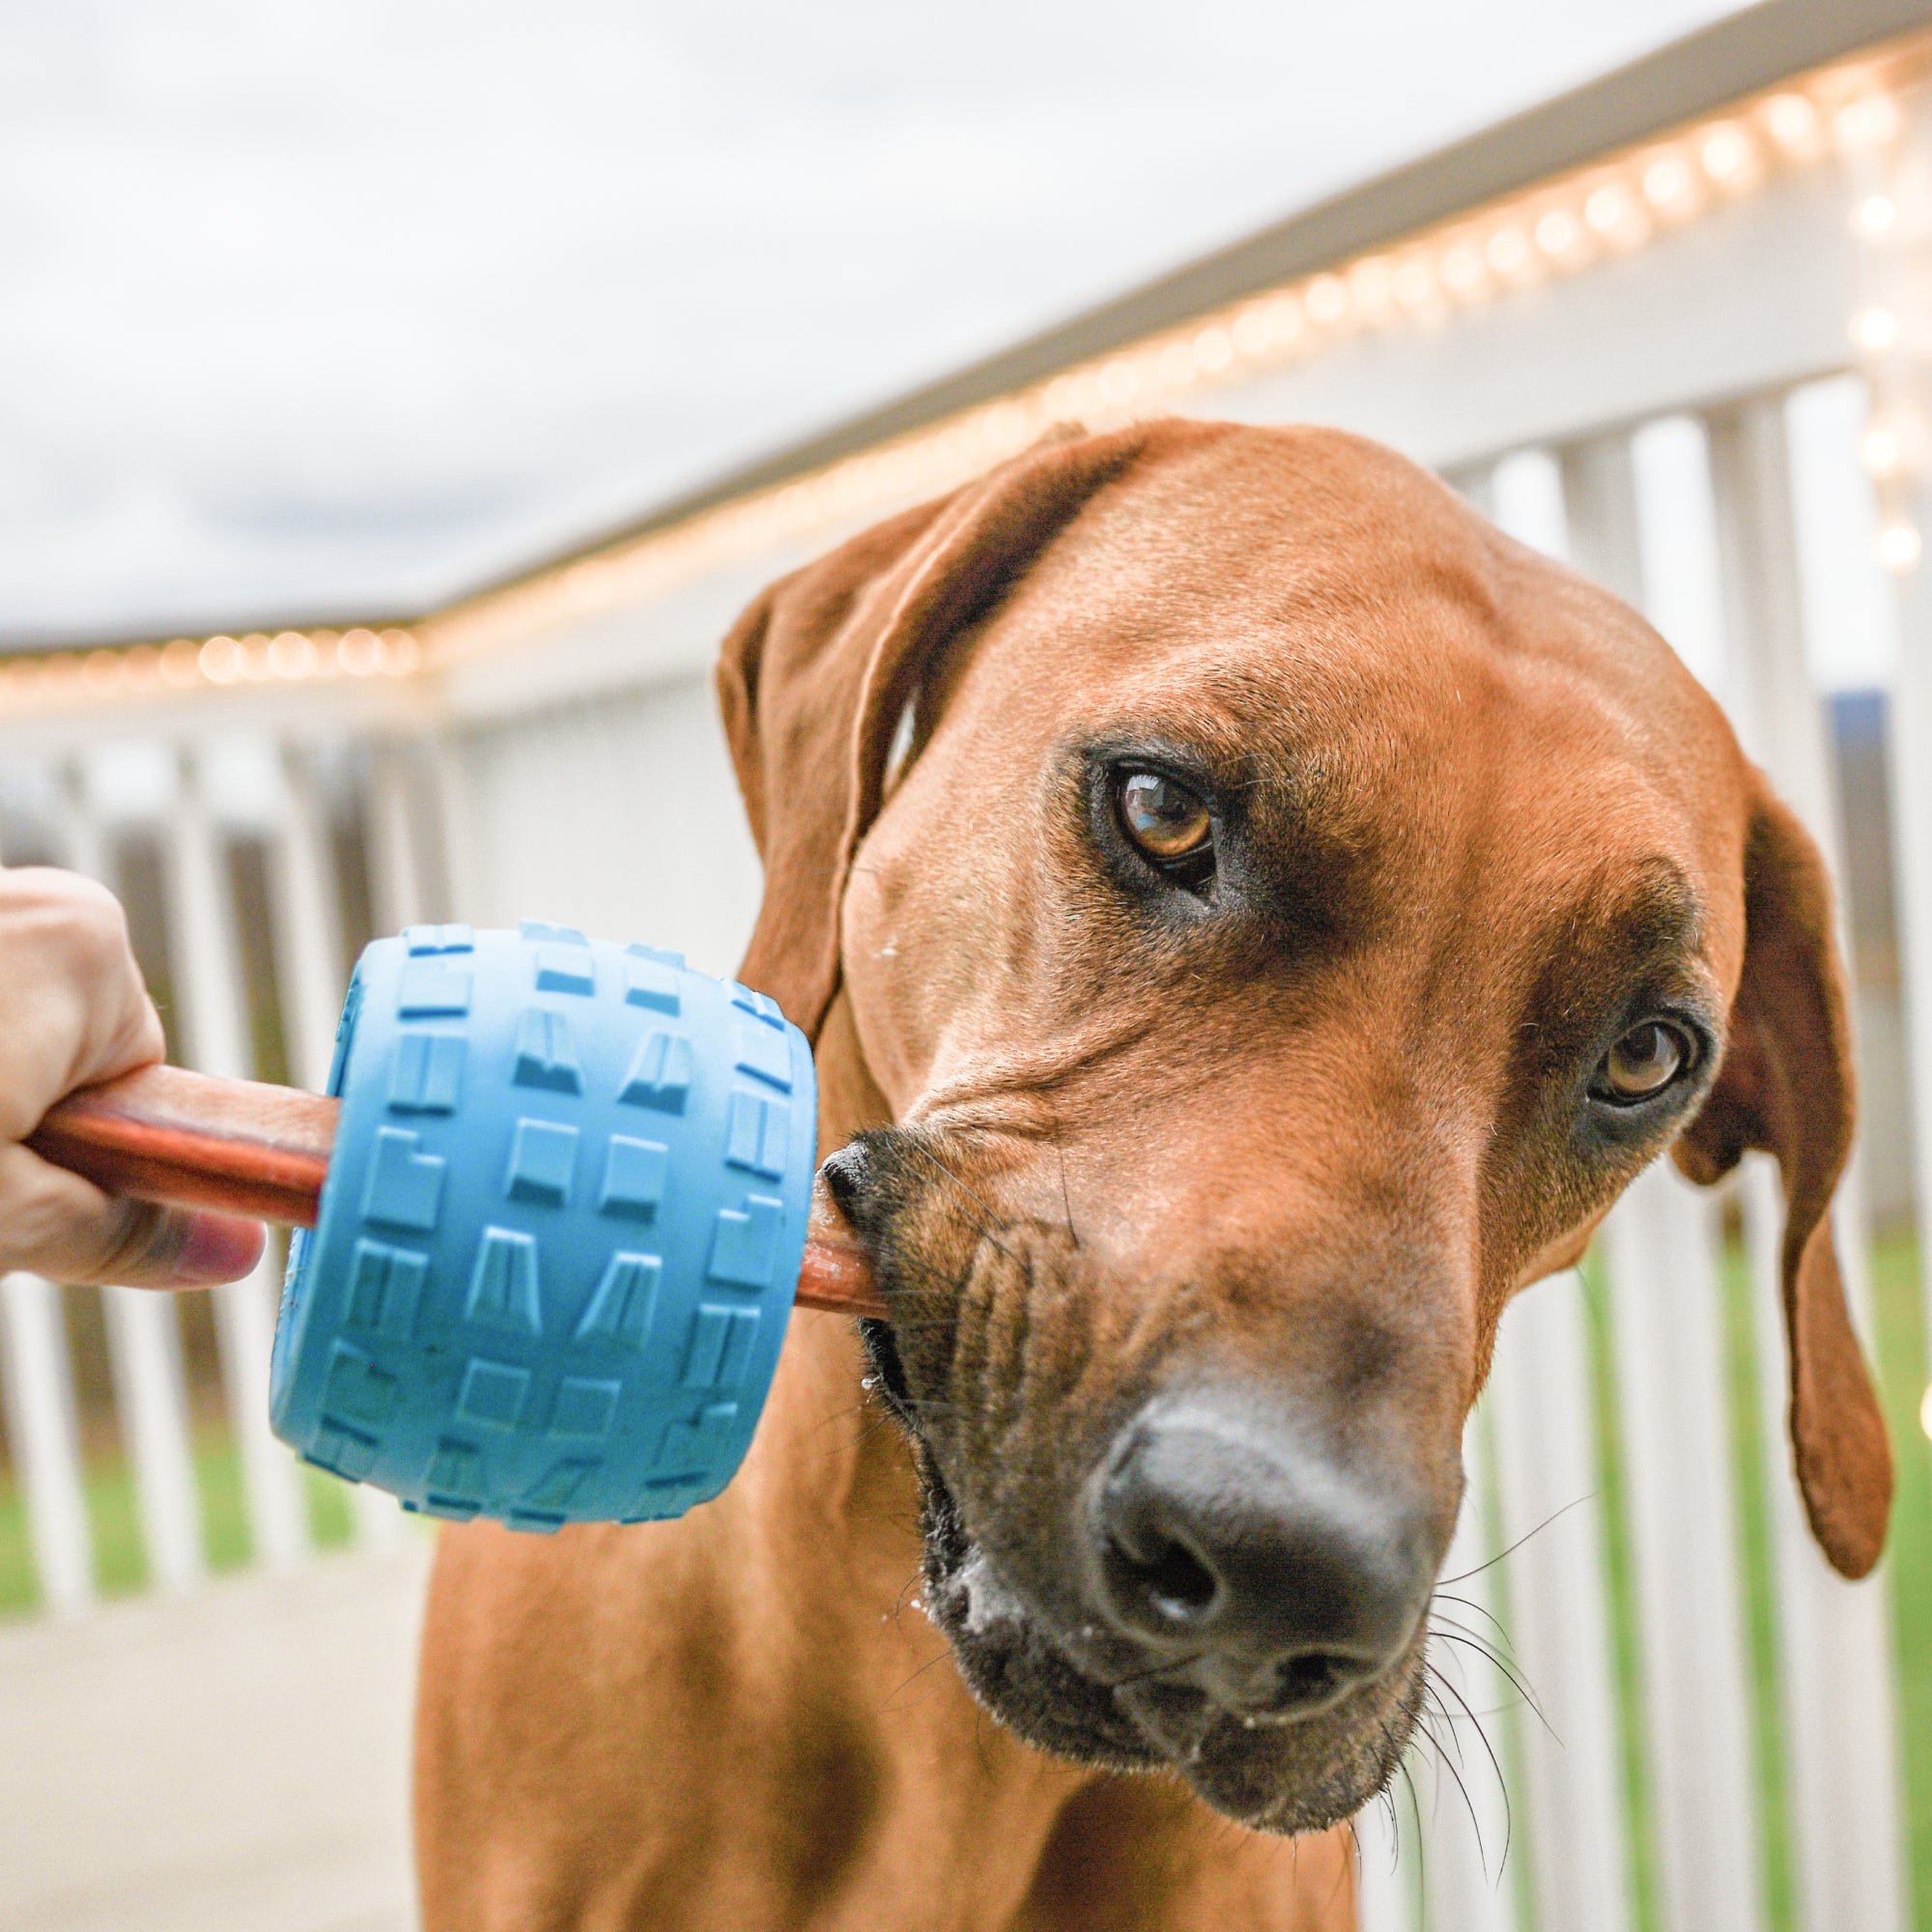 Tough Rubber Treat Holder and Chew Toy